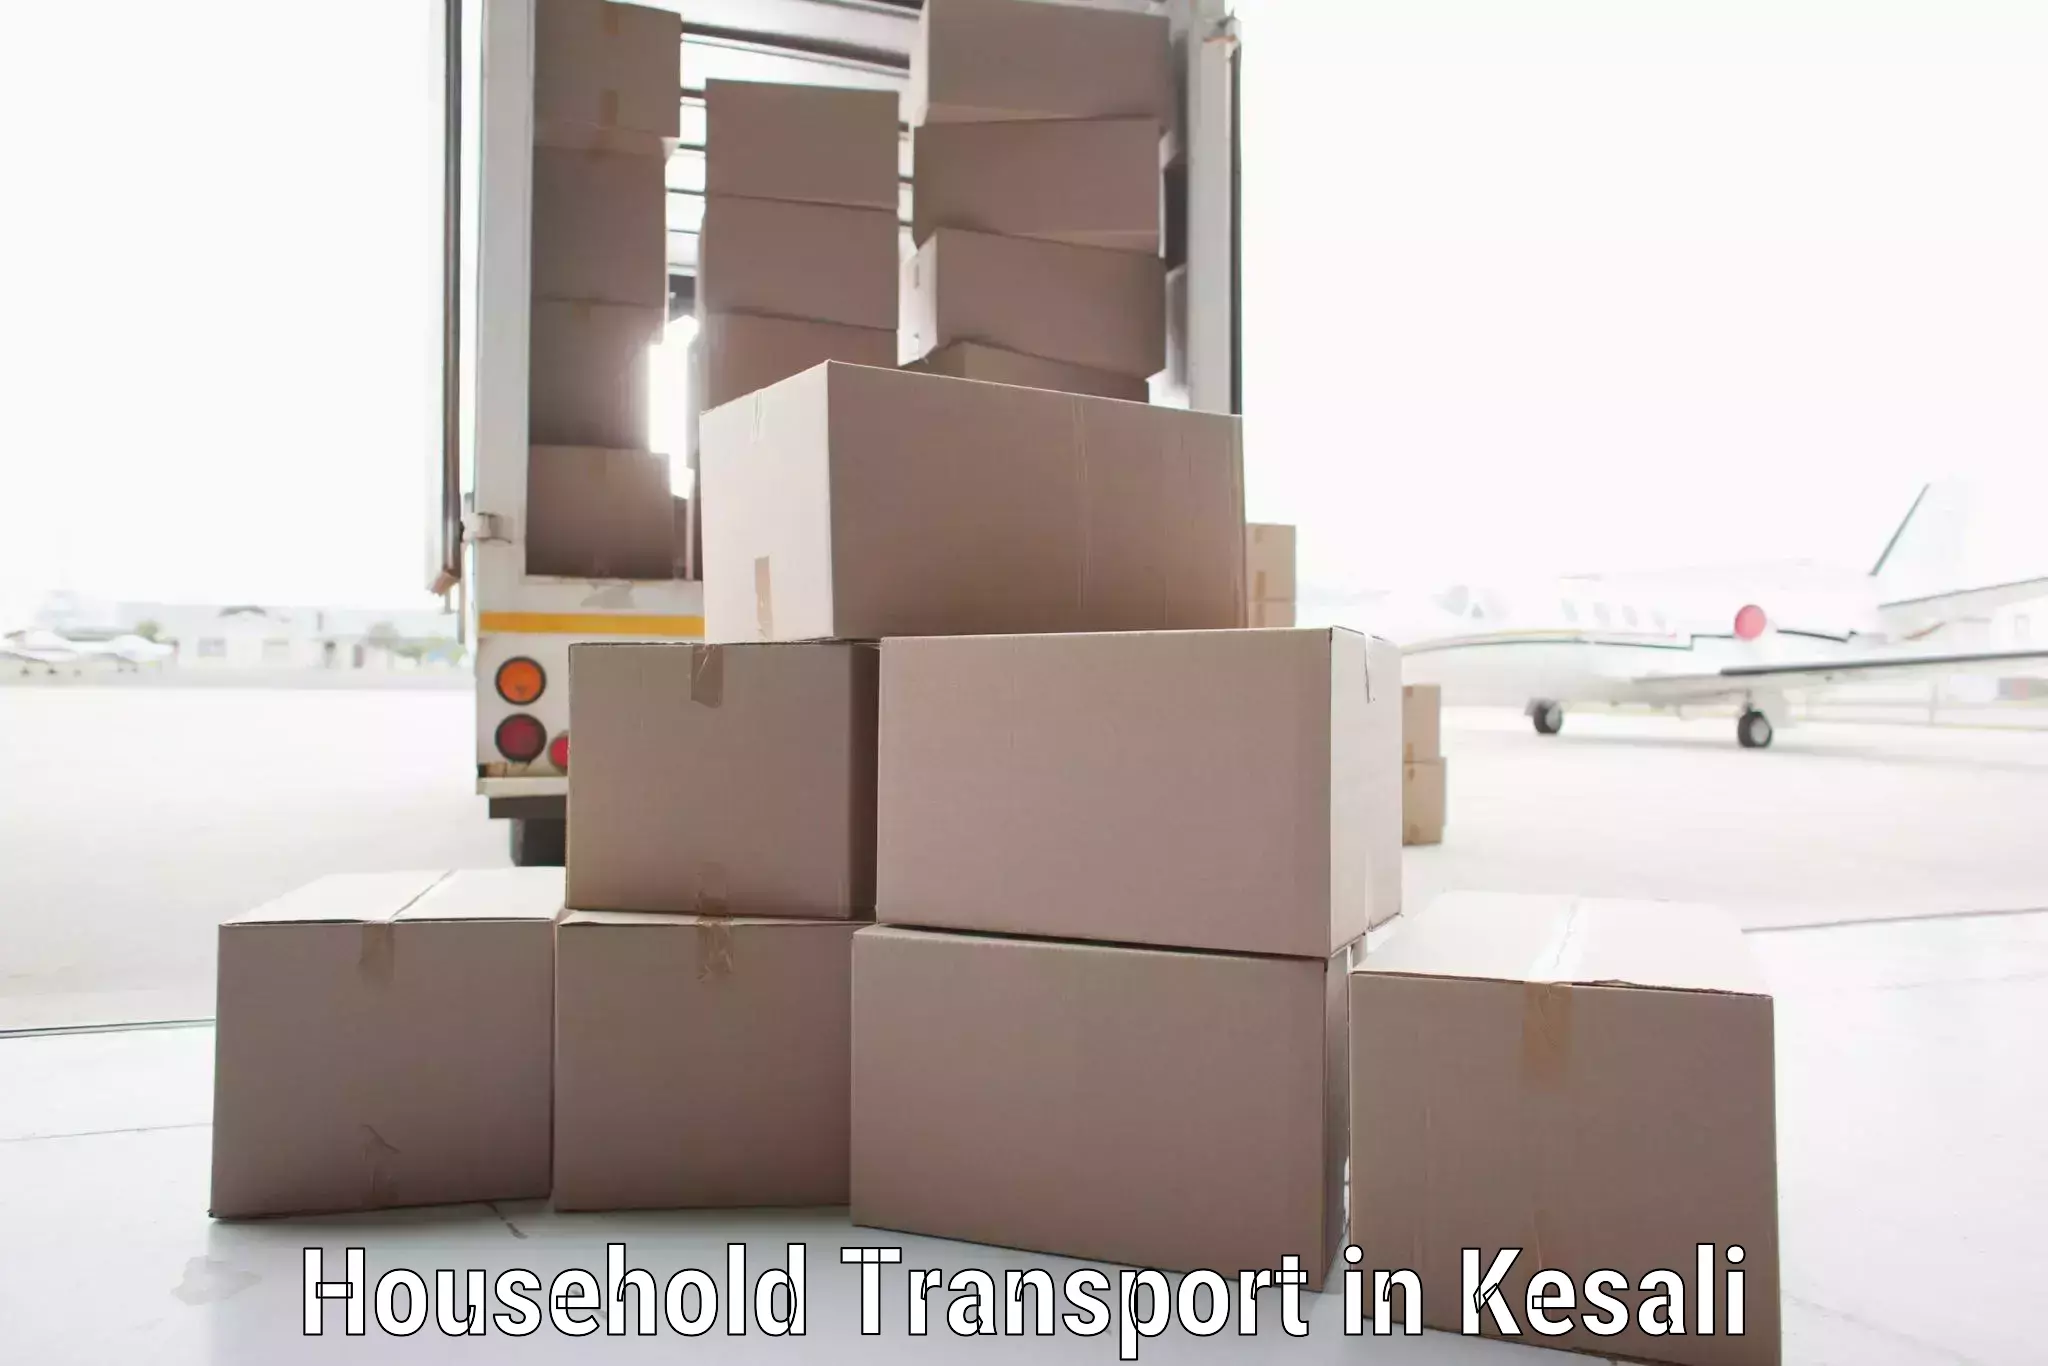 High-quality moving services in Kesali